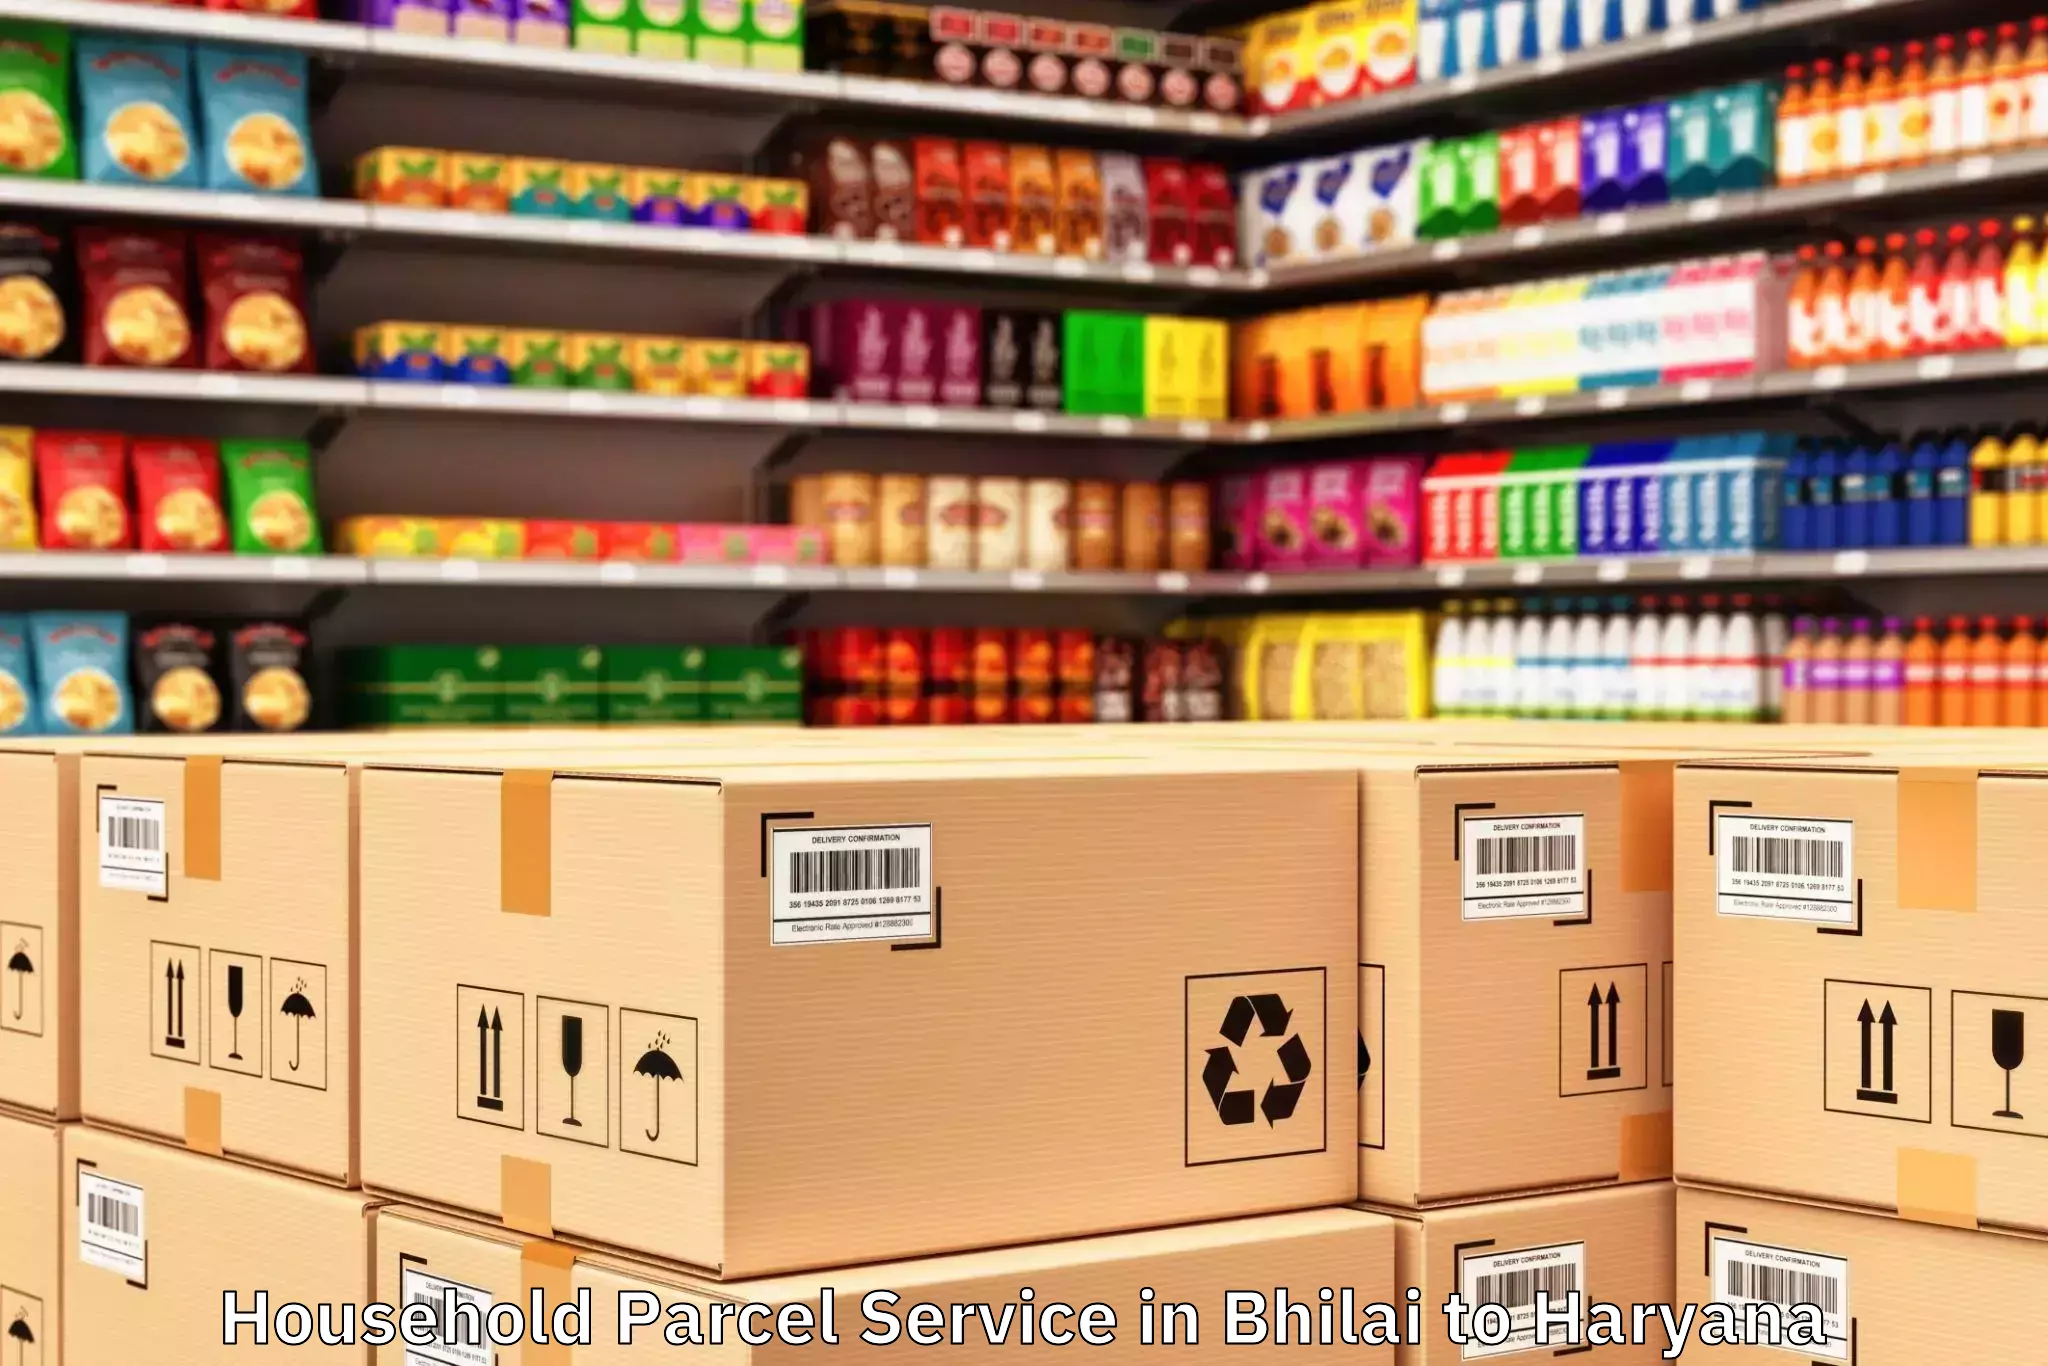 Top Bhilai to Chaudhary Bansi Lal University Bhiwani Household Parcel Service Available